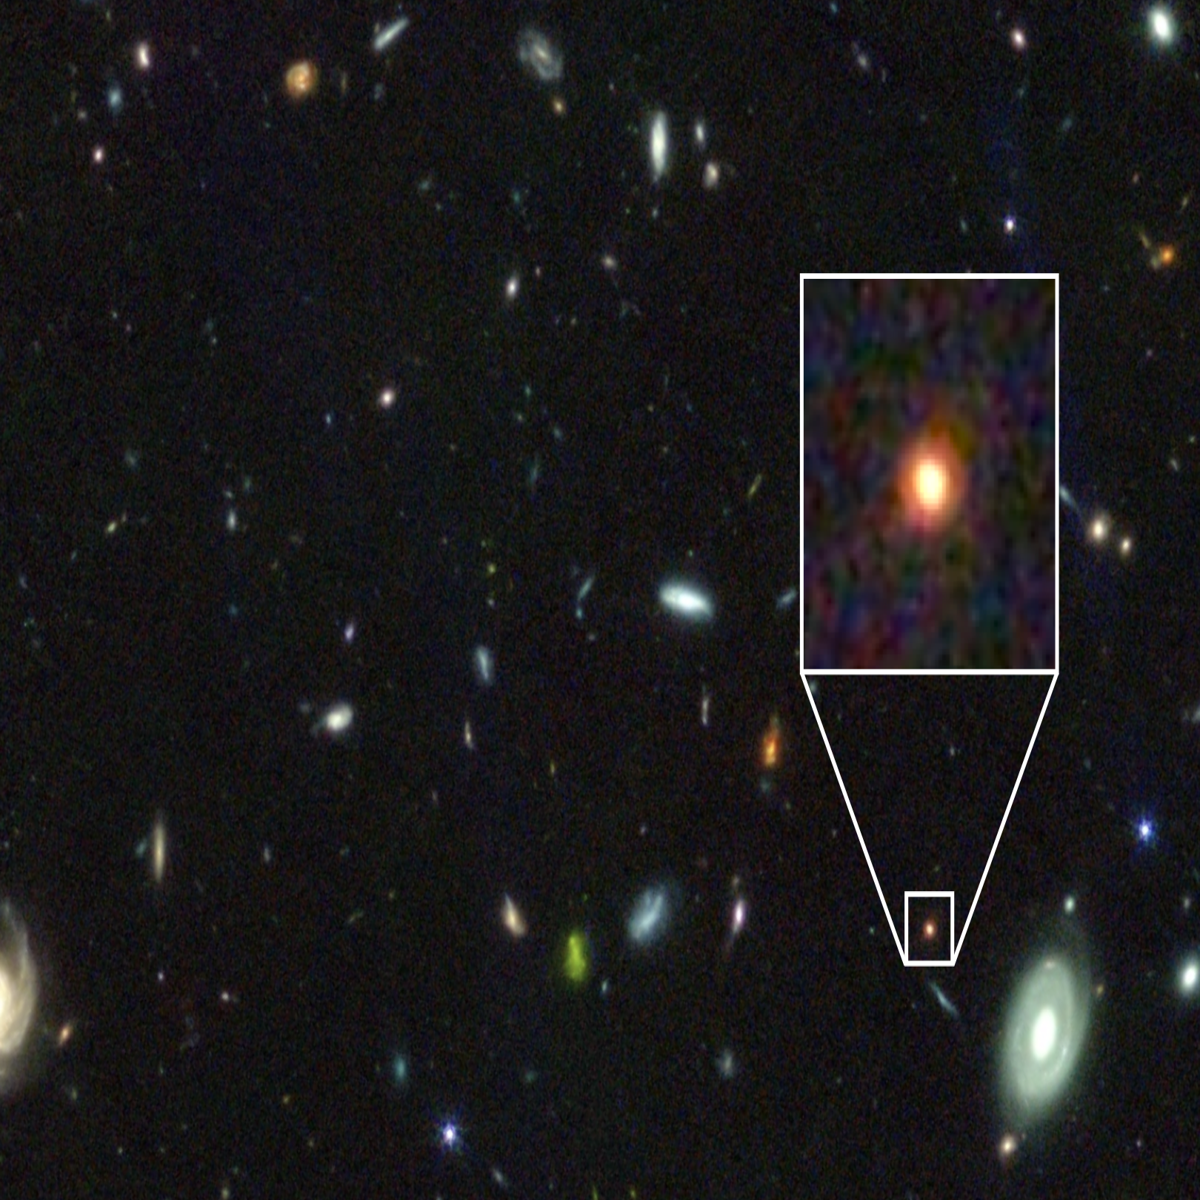 Ancient galaxy discovered 25 billion light years away using most powerful  space telescope ever built